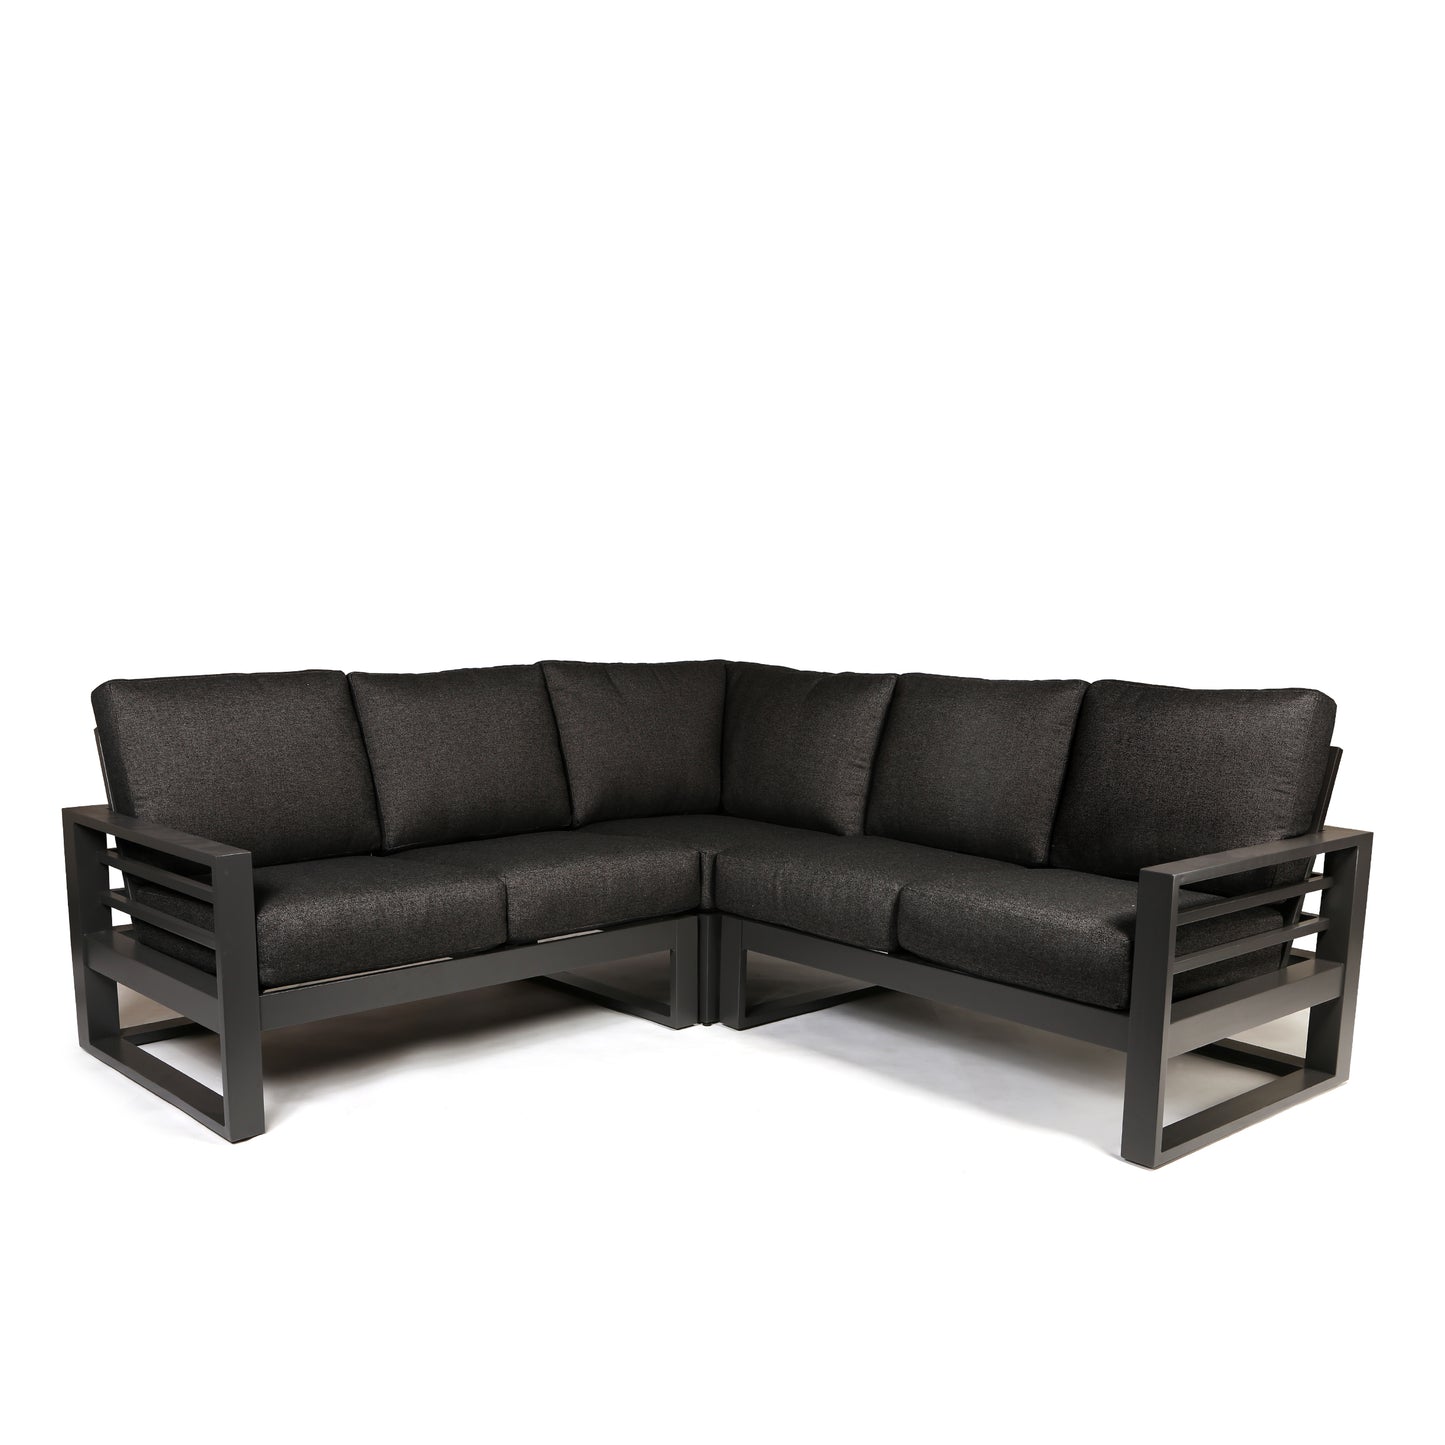 Palermo High Back Sectional Set